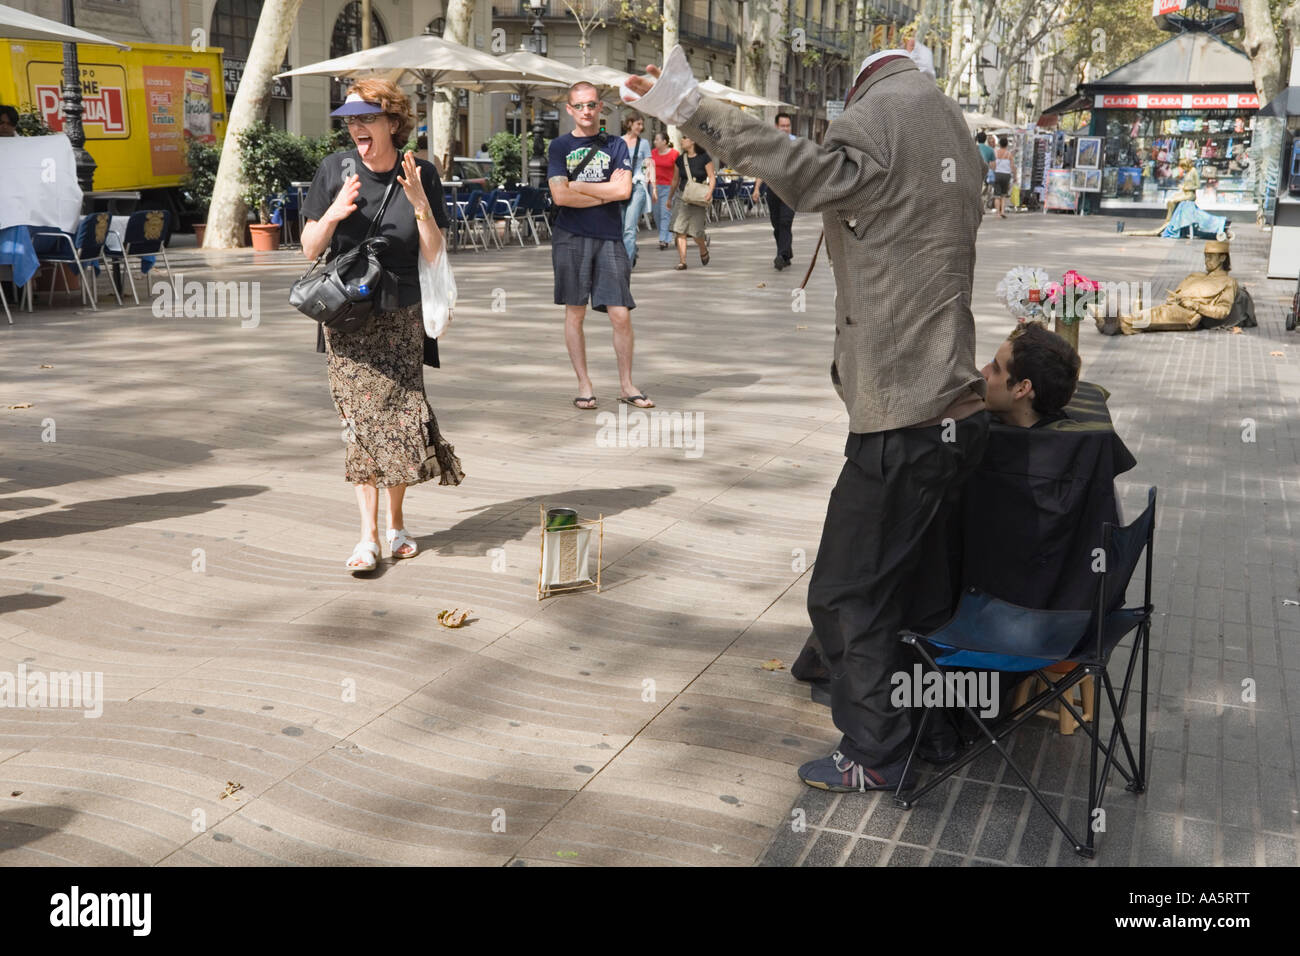 Barcelona, Spain. Headless act, street performers surprise a passerby on La Rambla Stock Photo